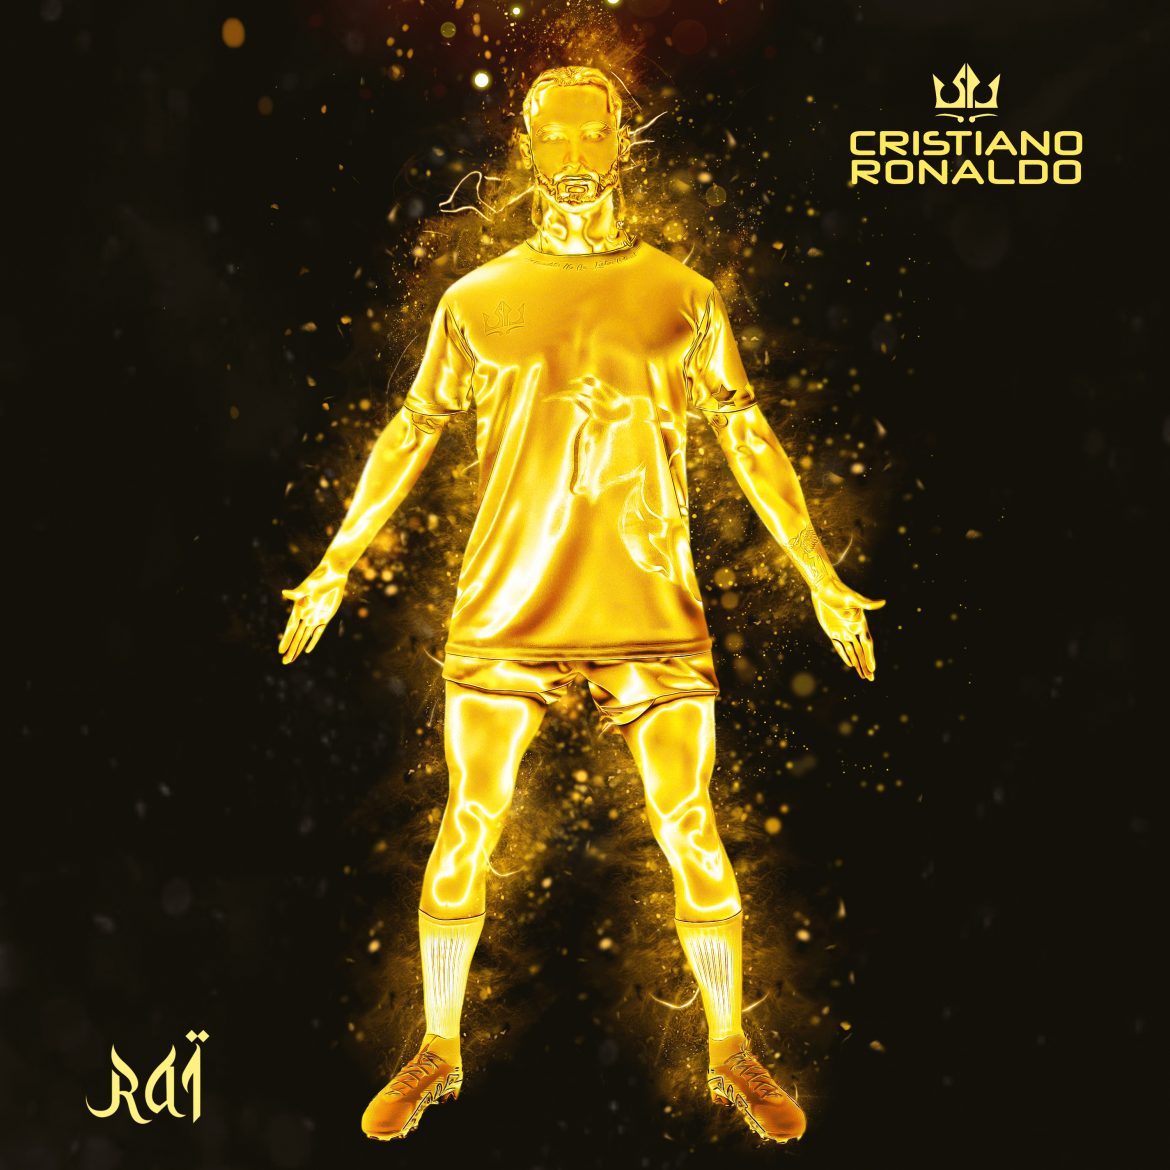 The new single ‘Cristiano Ronaldo’ from ‘RAI’ with its contagious catchy rap and solid flowing rhythms is on the playlist now.